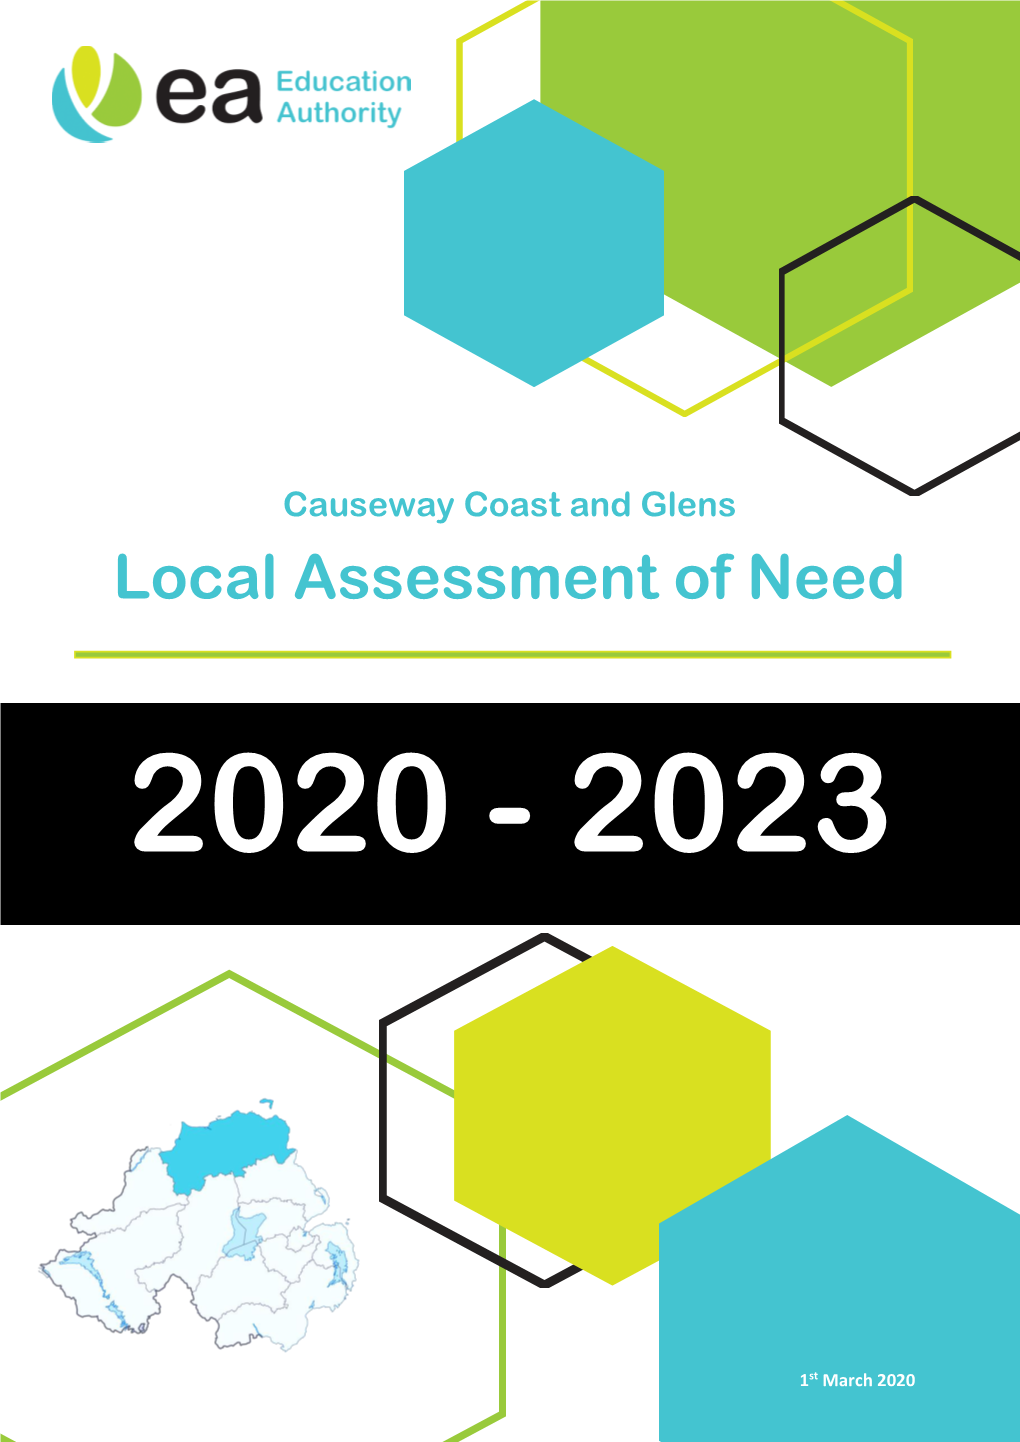 Download 2020-2023 Local Assessment of Need